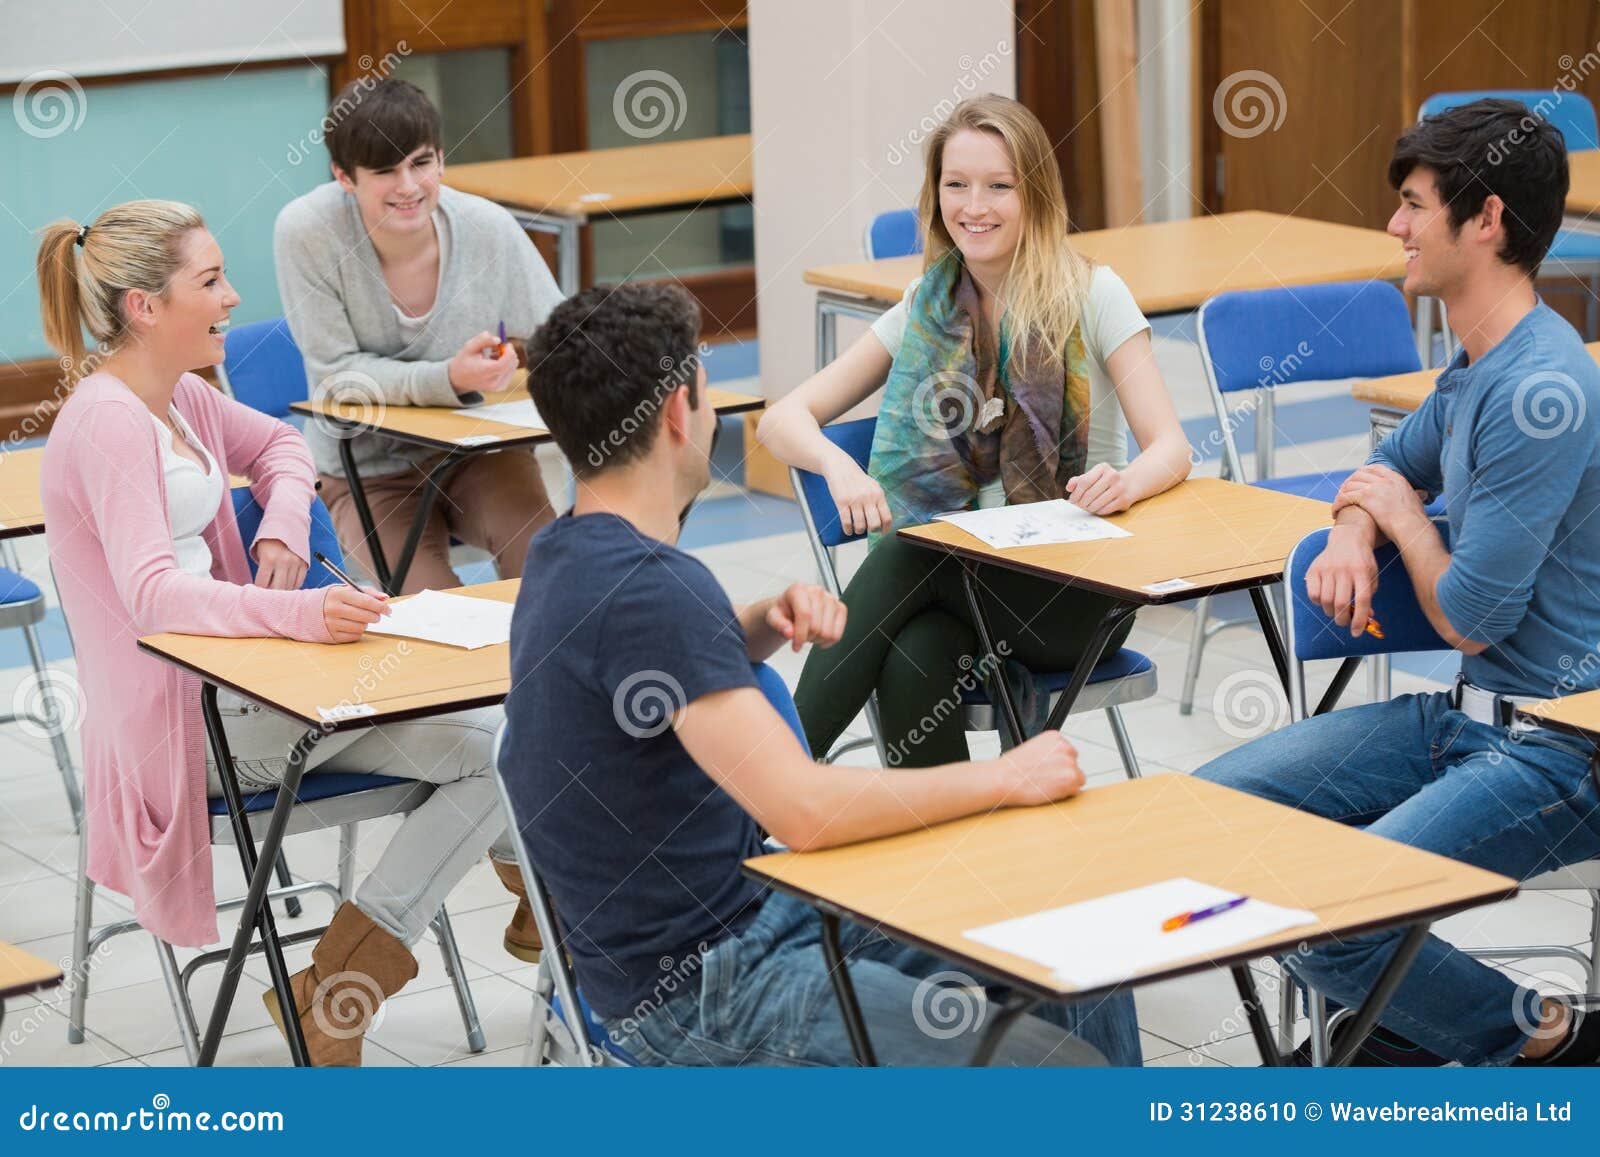 Chatting Students In The Classroom Stock Photo - Image of desk,  conversation: 31238610